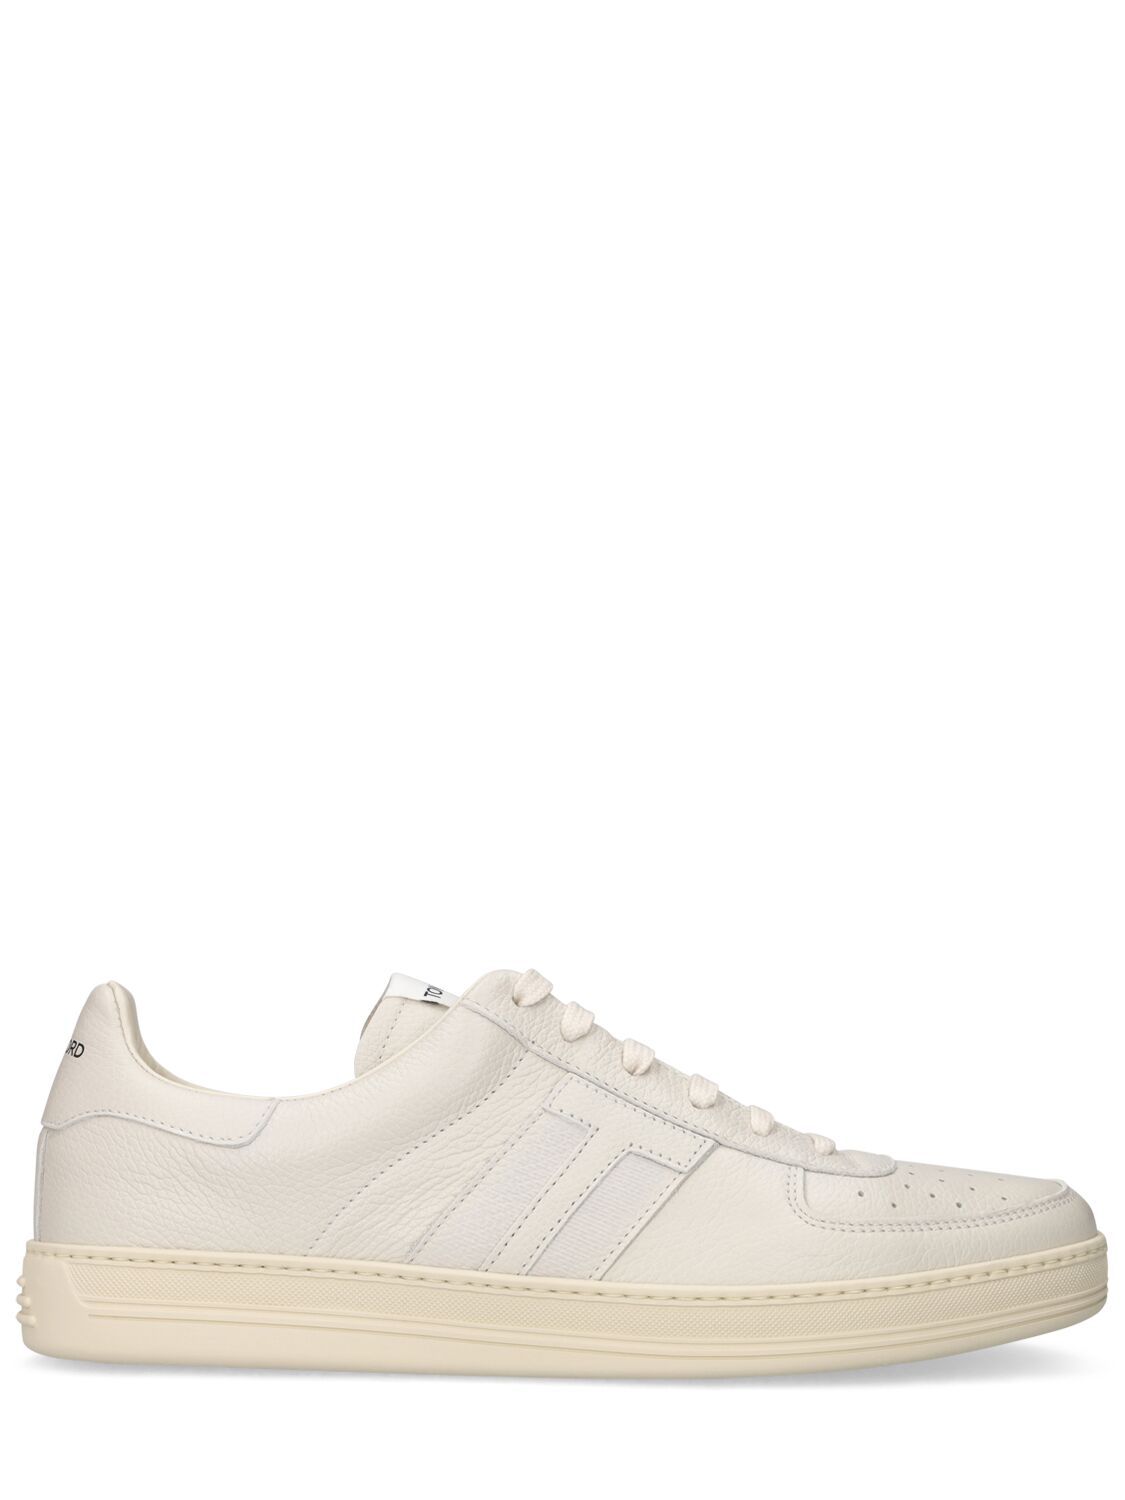 Tom Ford Grain Leather Low Top Sneakers In Butter,cream